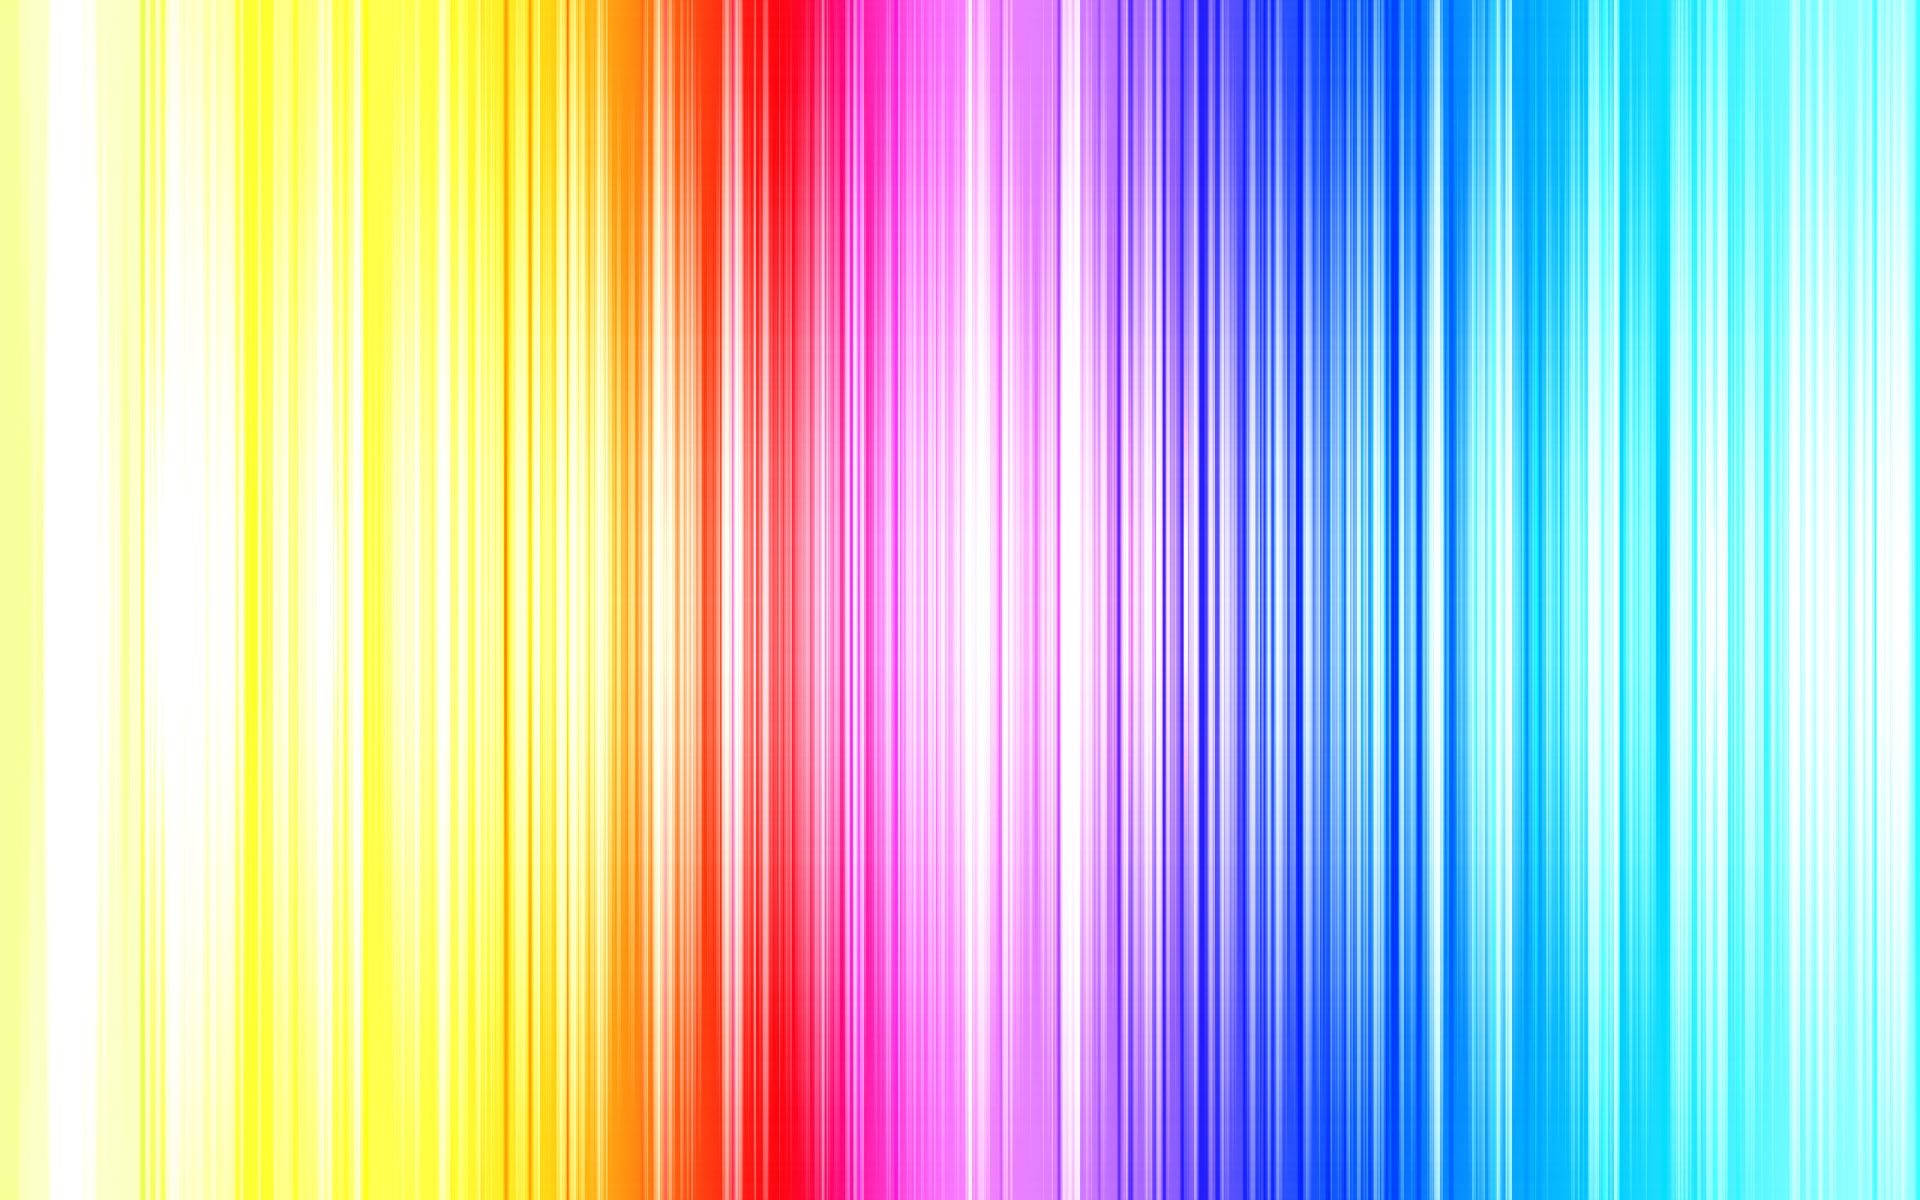 Enjoy a Brilliant and Colorful Spectrum Wallpaper